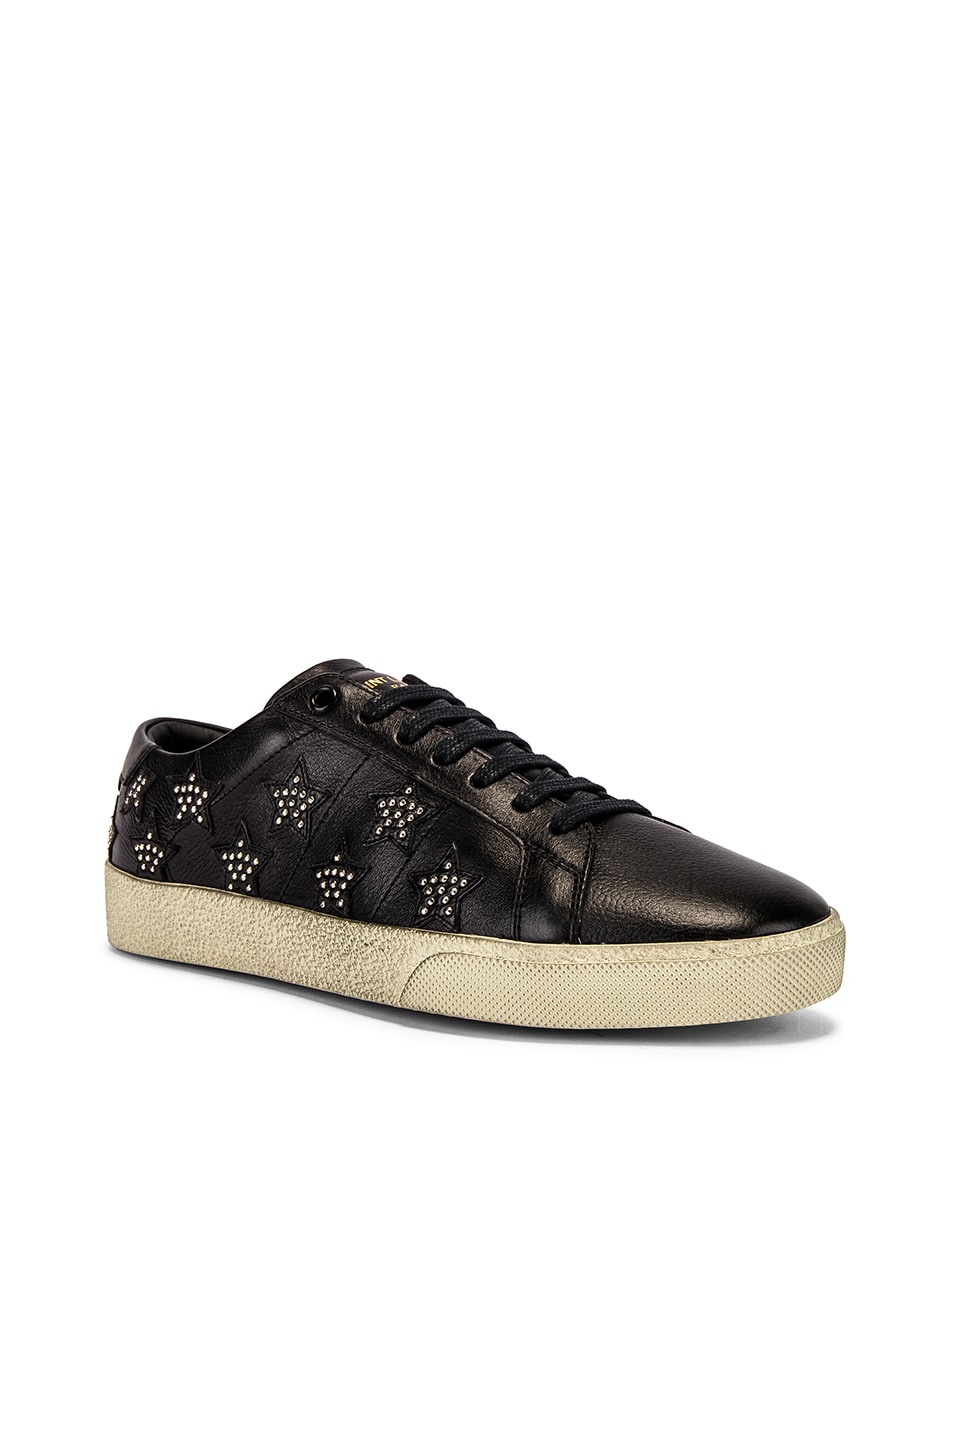 Image 1 of Saint Laurent Court Classic Studded California Sneakers in Black & Silver